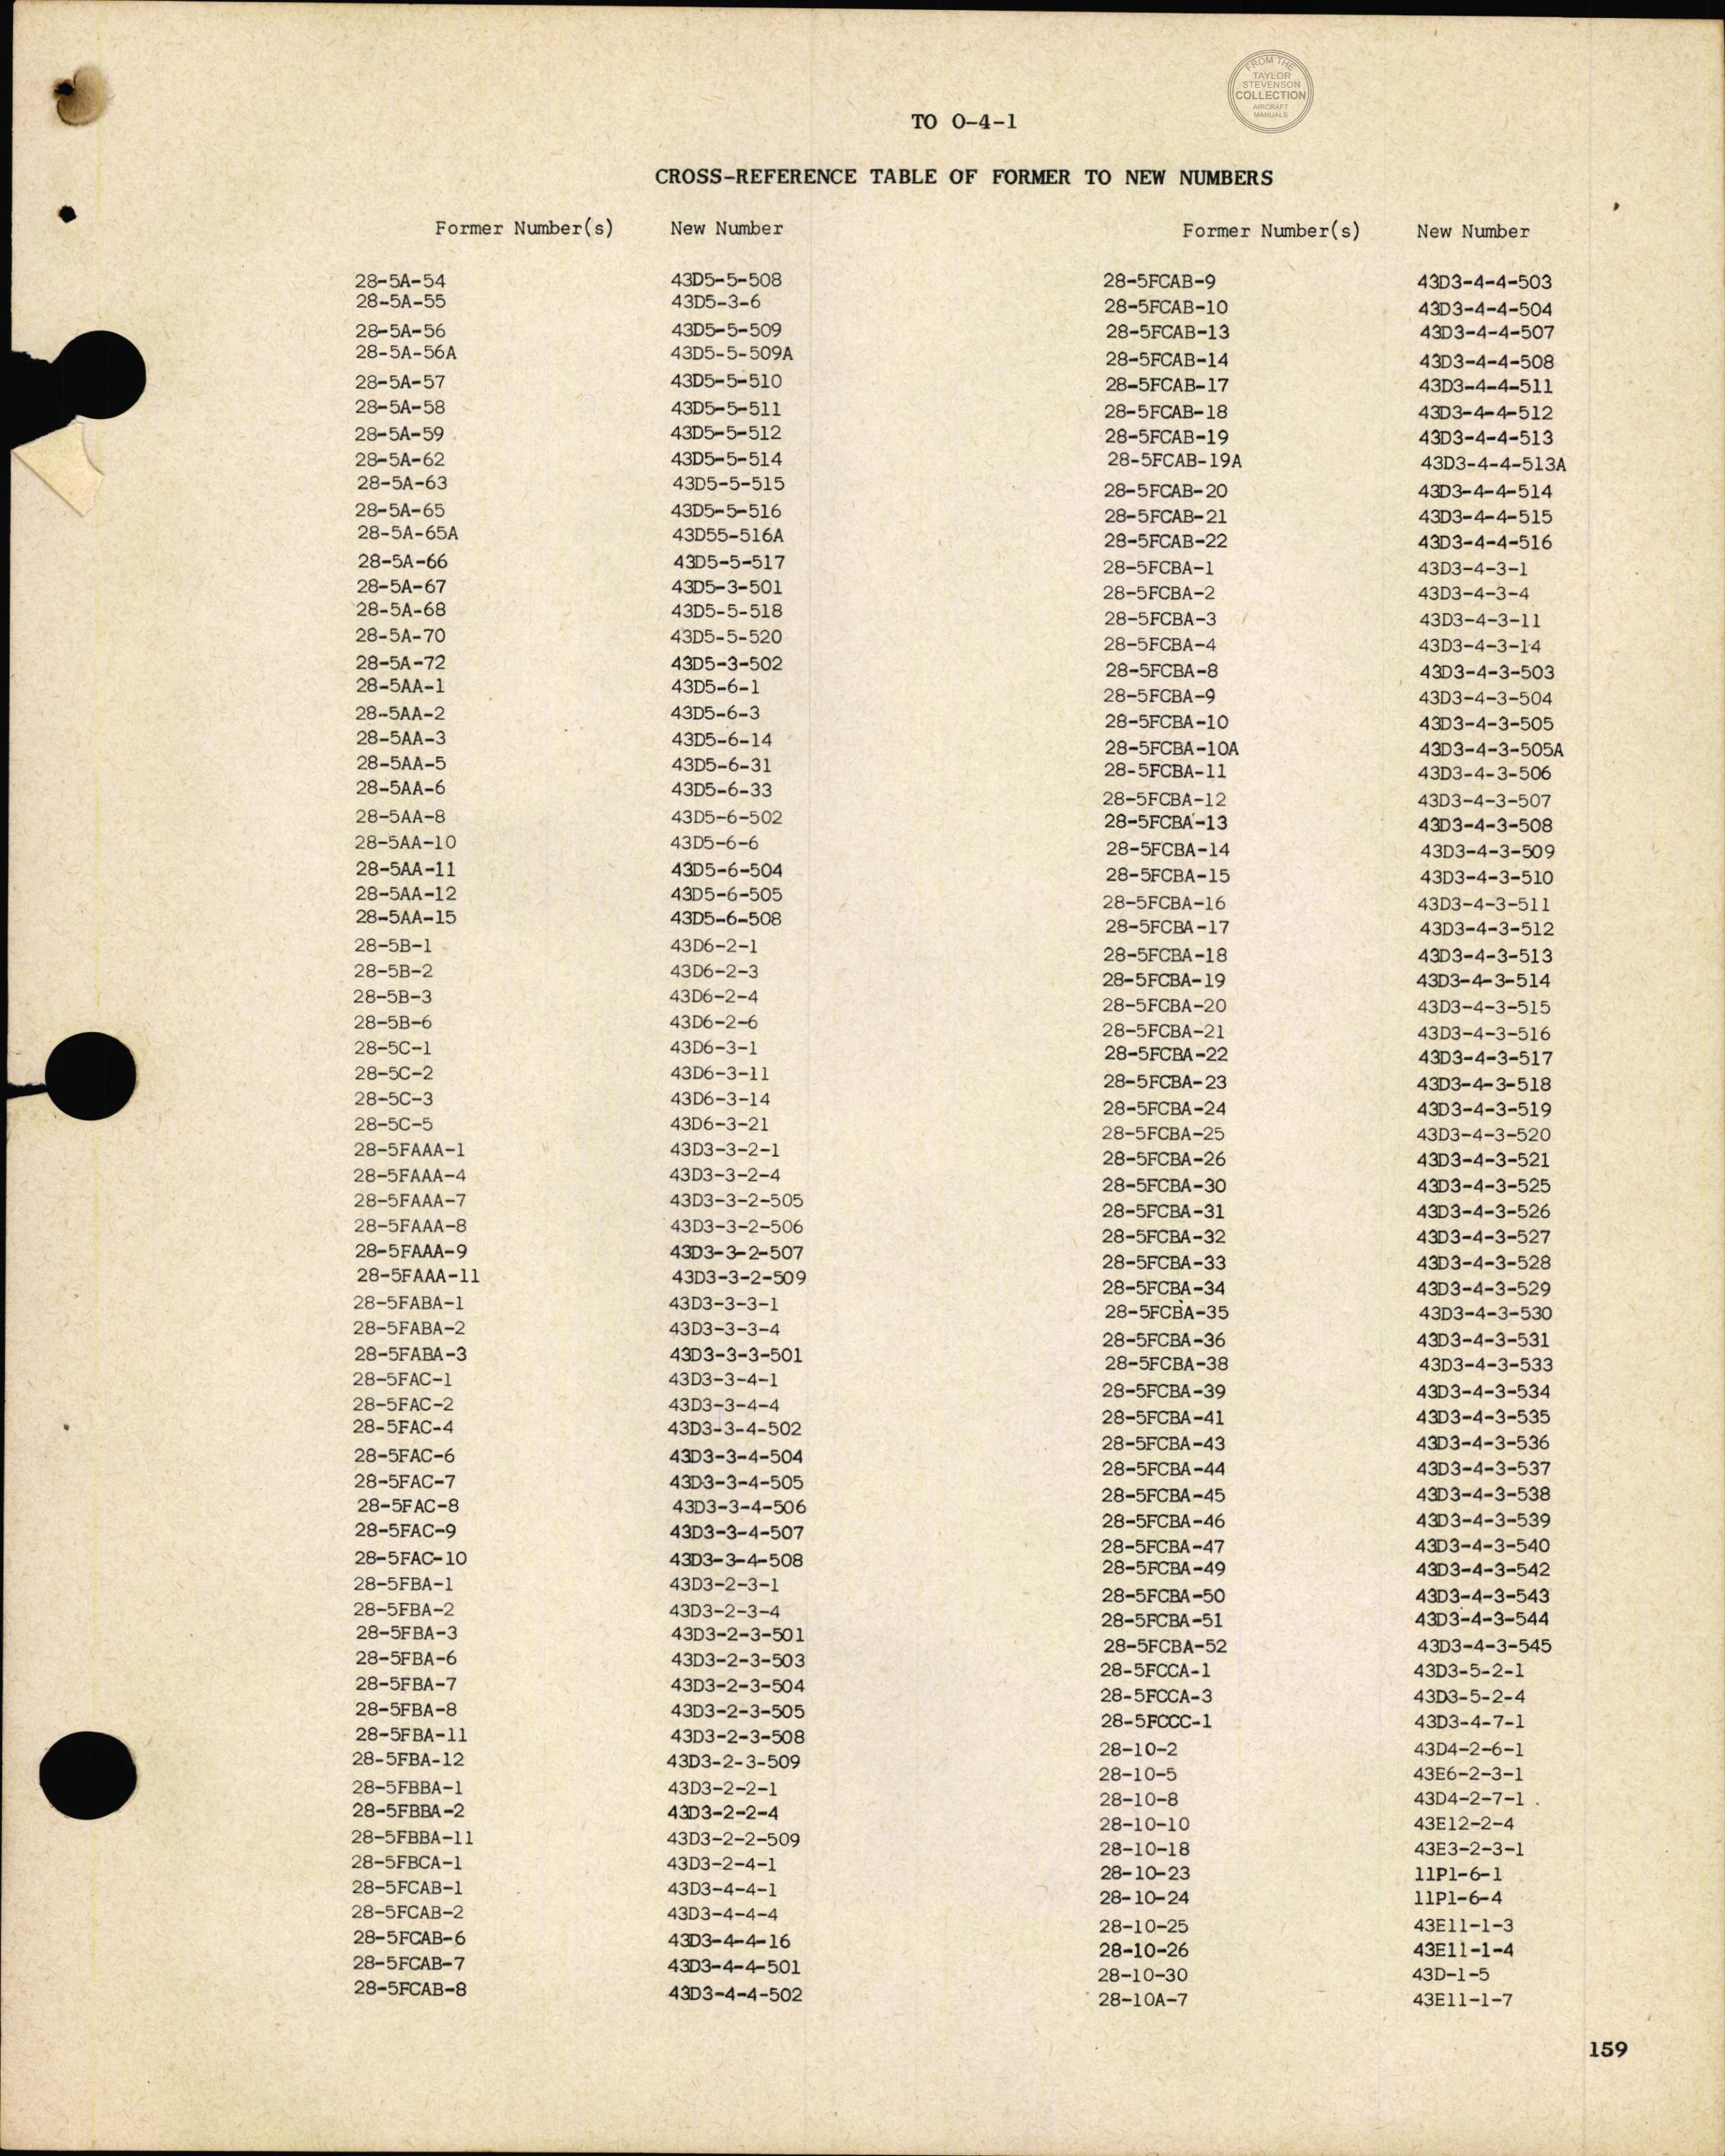 Sample page 161 from AirCorps Library document: Cross Reference Table of Former to New Numbers